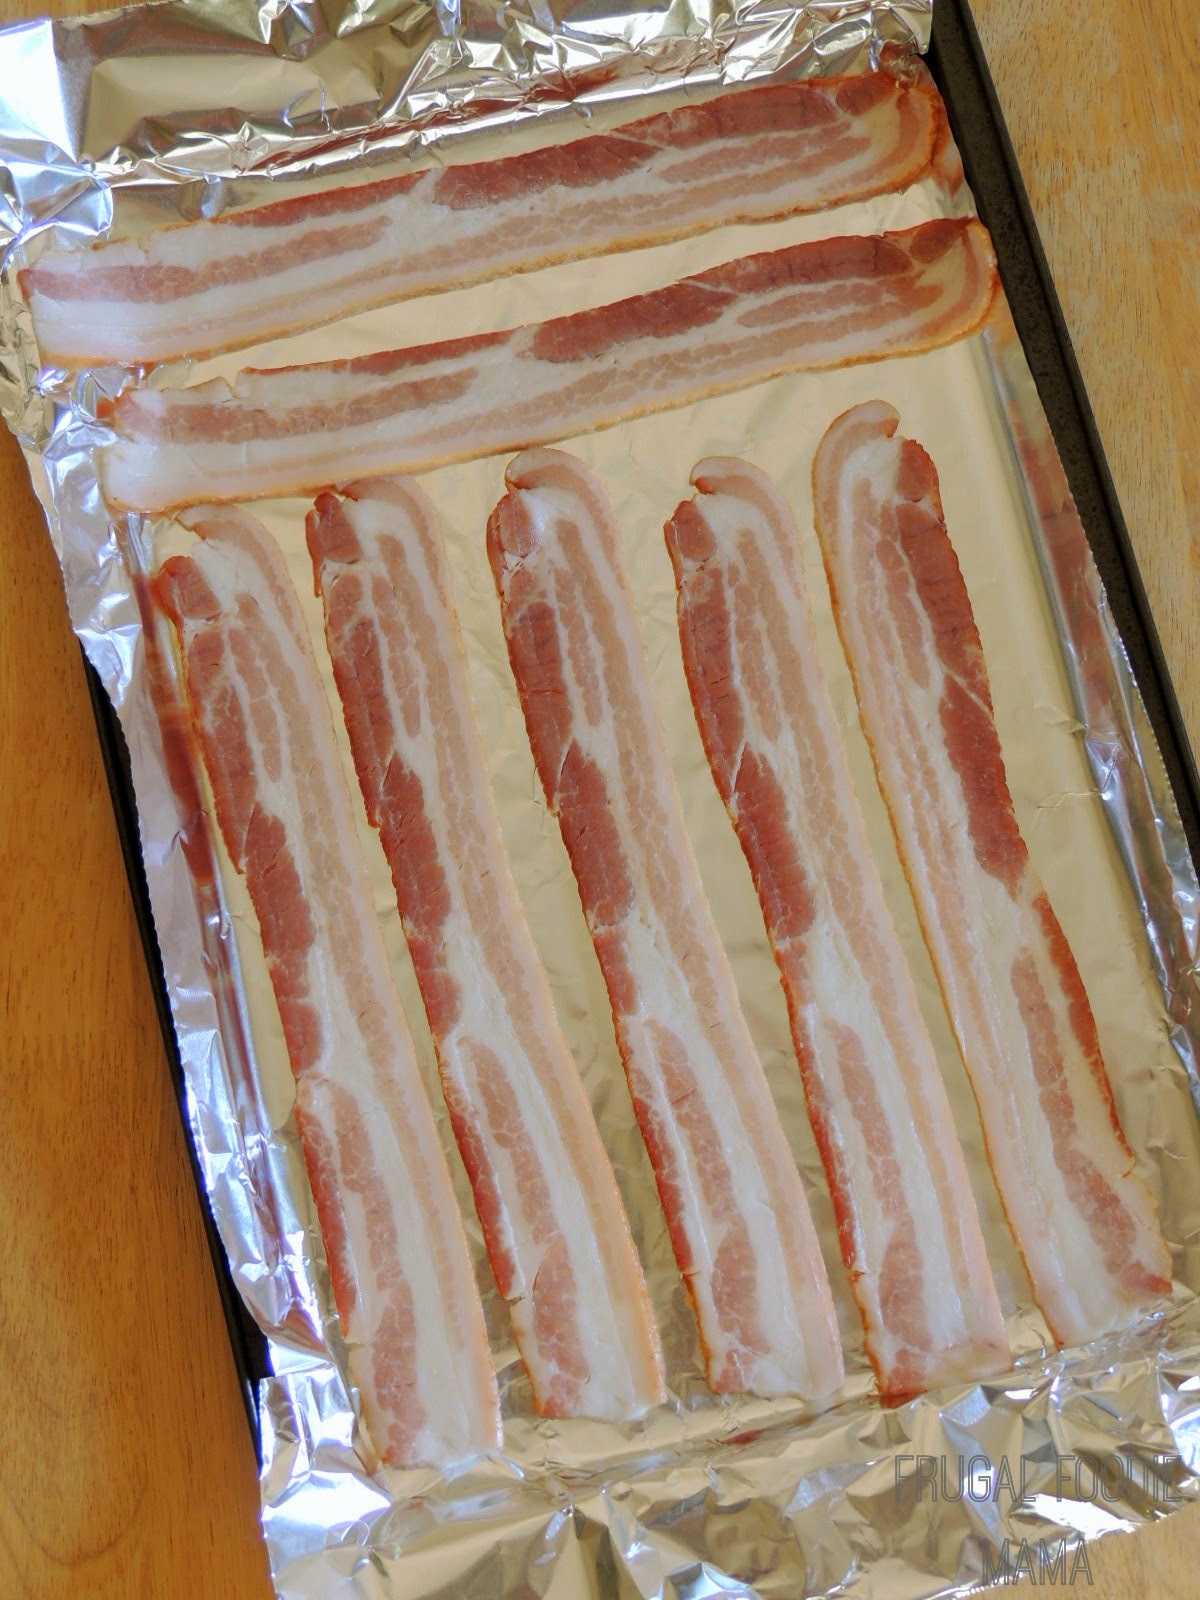 Have you always wanted to try baking your bacon? Today I am sharing my method & tips for How to Bake Perfectly Crisp Bacon in your oven.